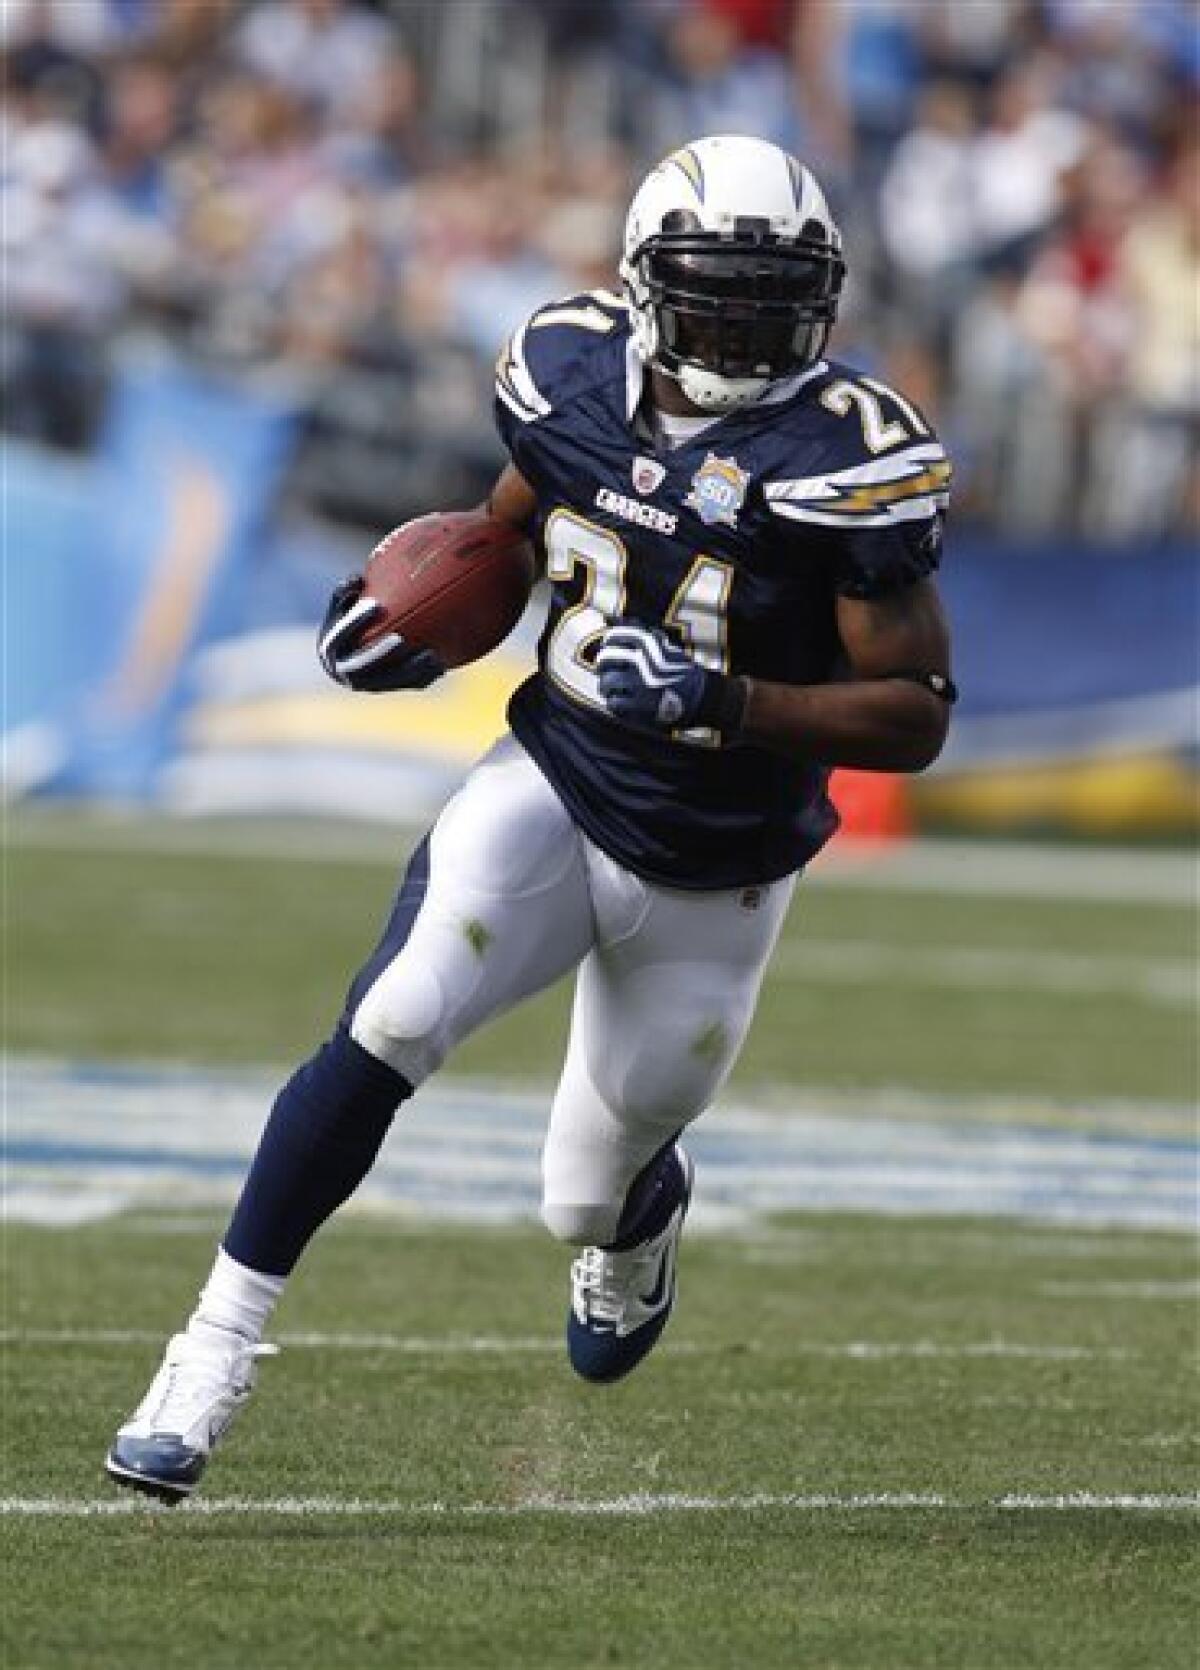 LaDainian Tomlinson explains why signing with Jets was the right move